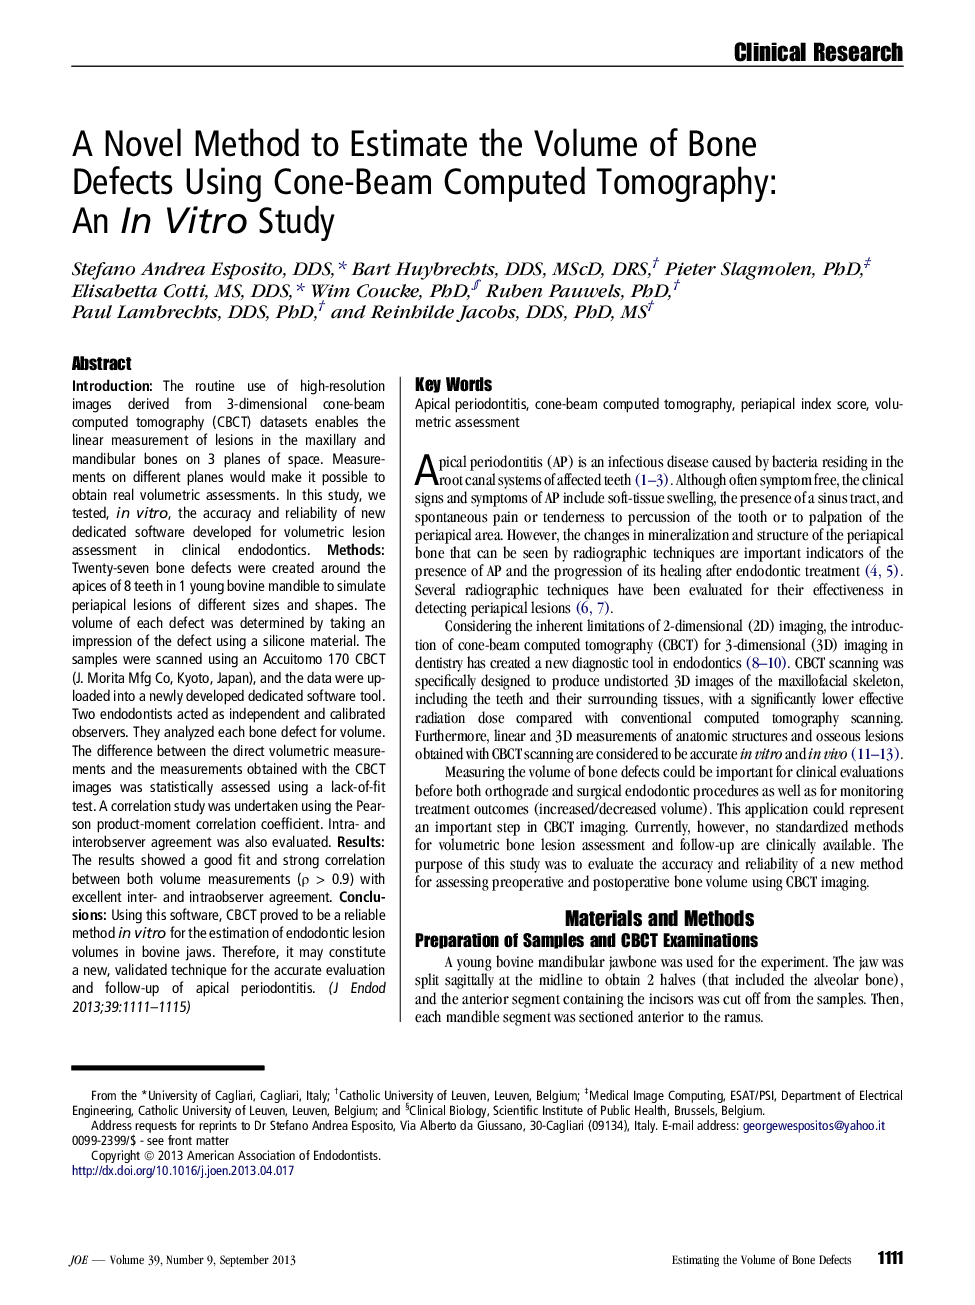 A Novel Method to Estimate the Volume of Bone Defects Using Cone-Beam Computed Tomography: An In Vitro Study